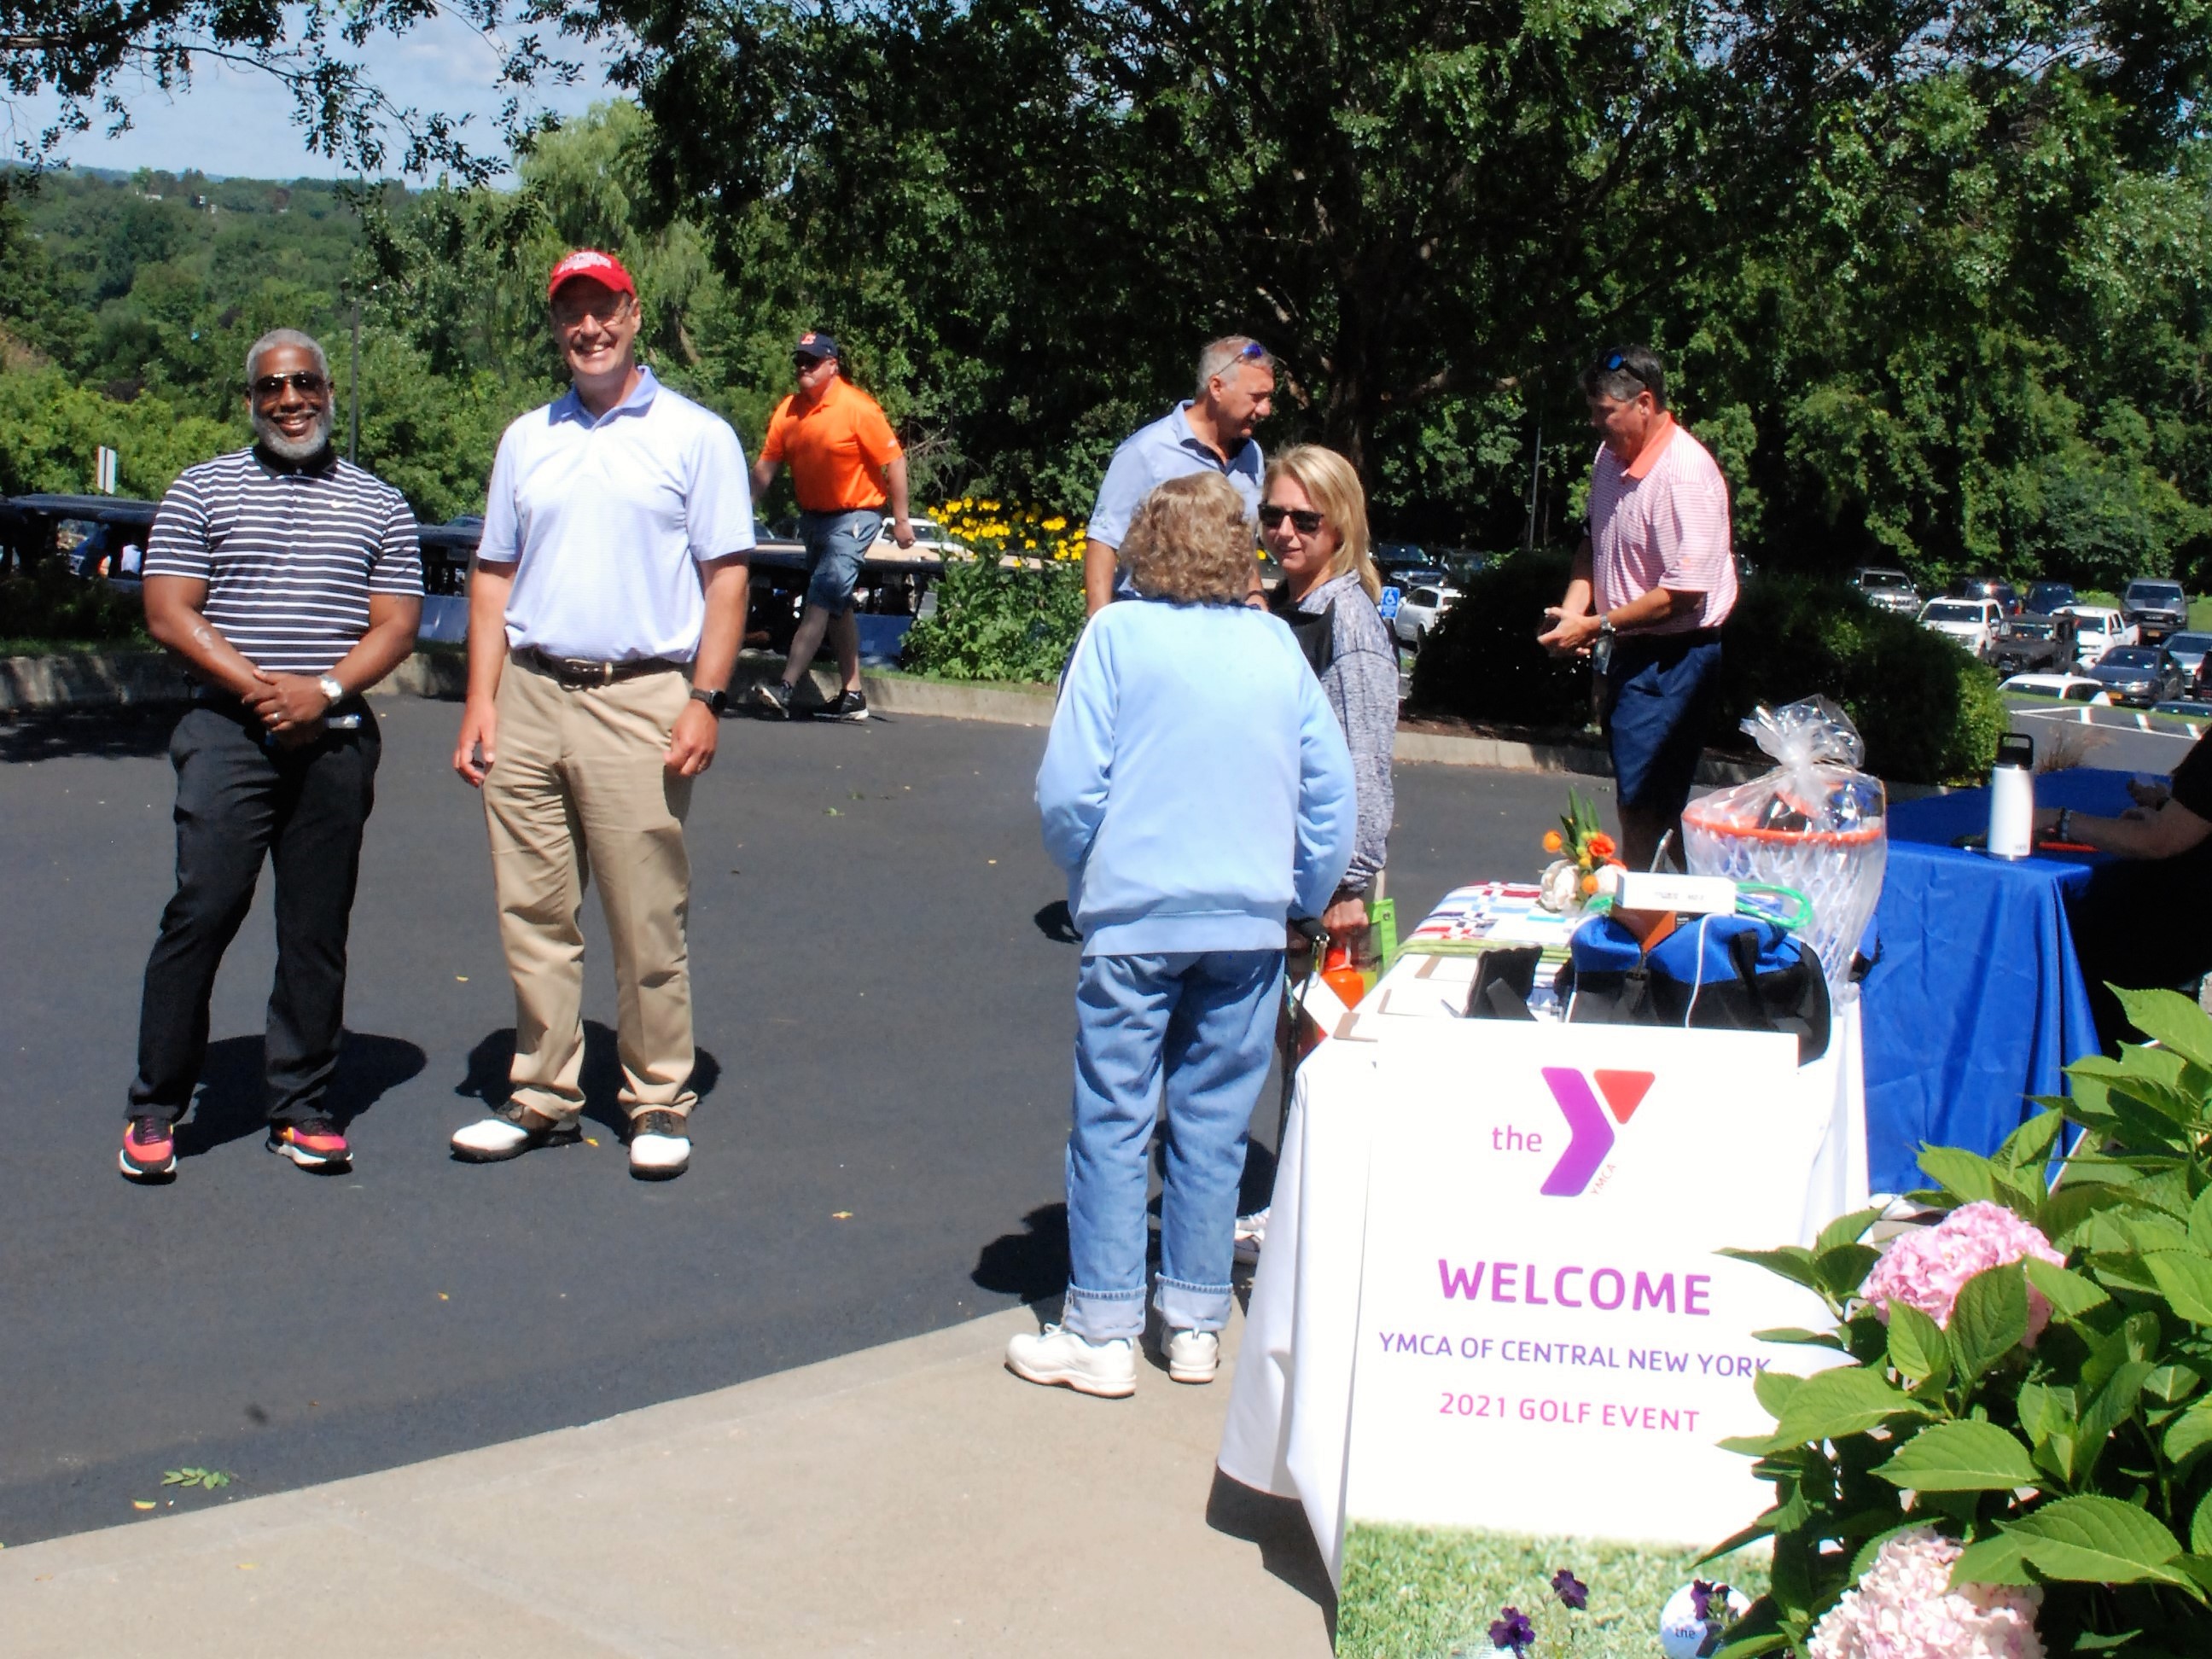 Over $30k Raised at 24th Annual Charity Golf Event | YMCA OF CENTRAL NEW  YORK